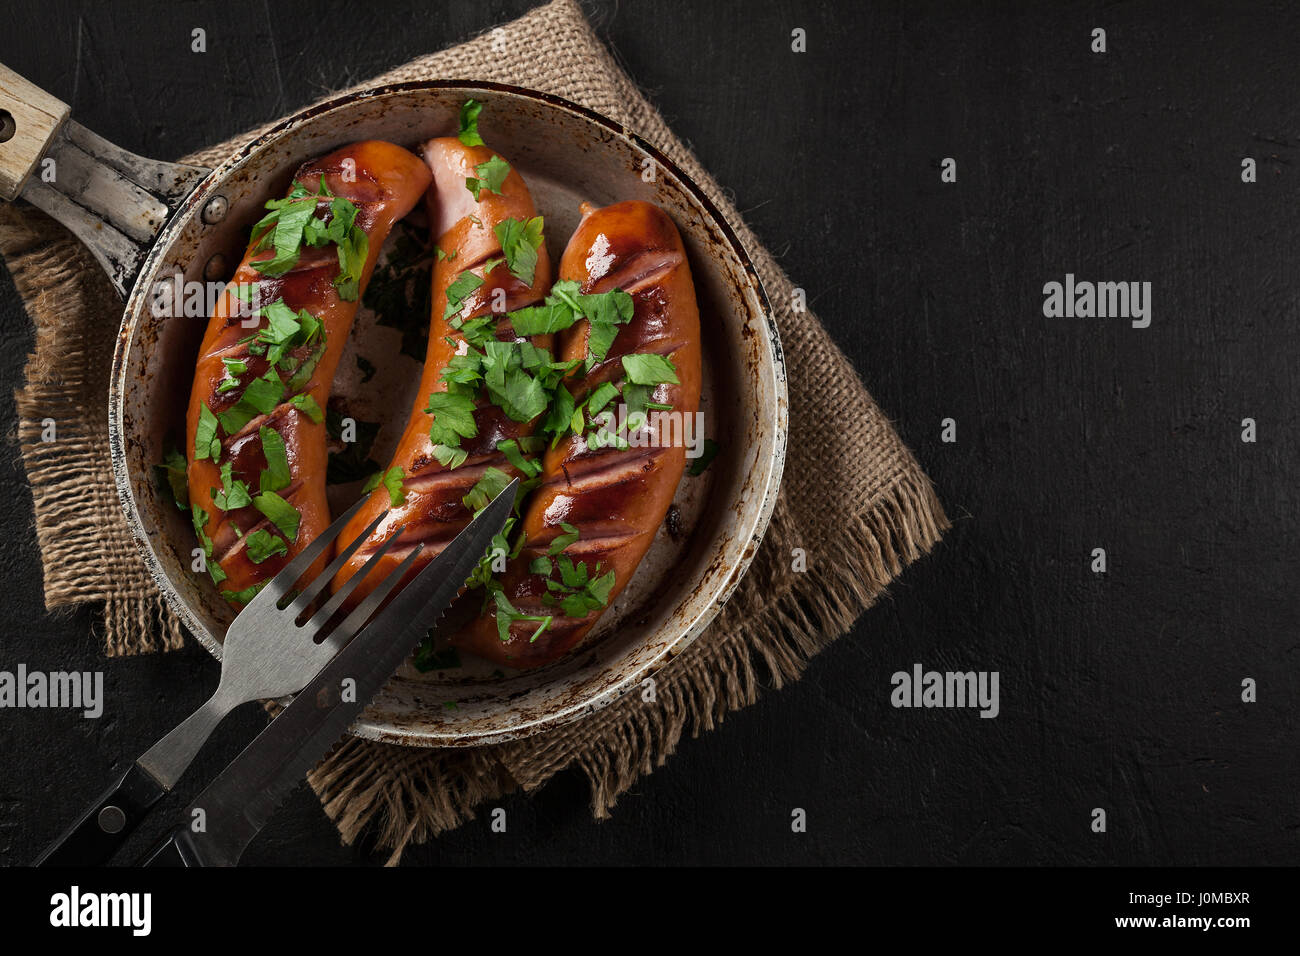 Fried sausage on an old pan on a black background Stock Photo